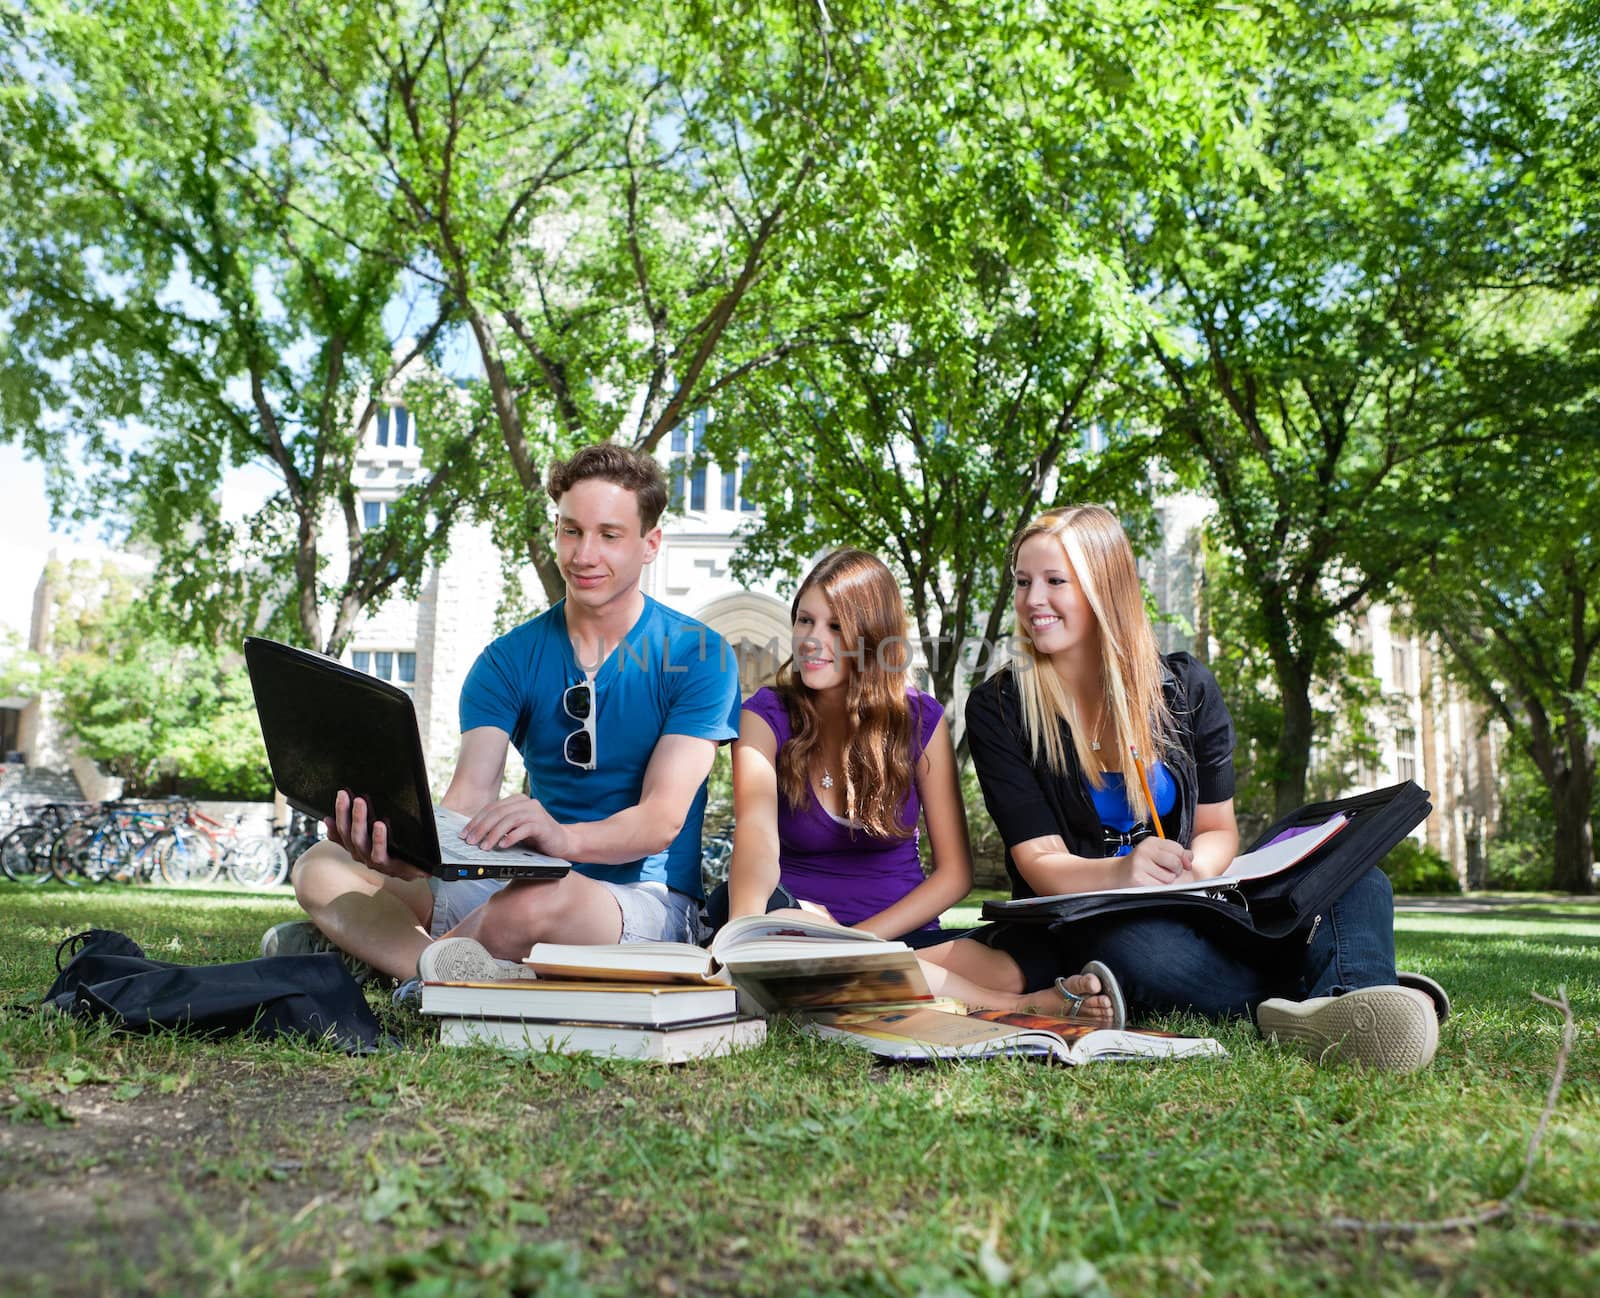 College students studying together on campus ground